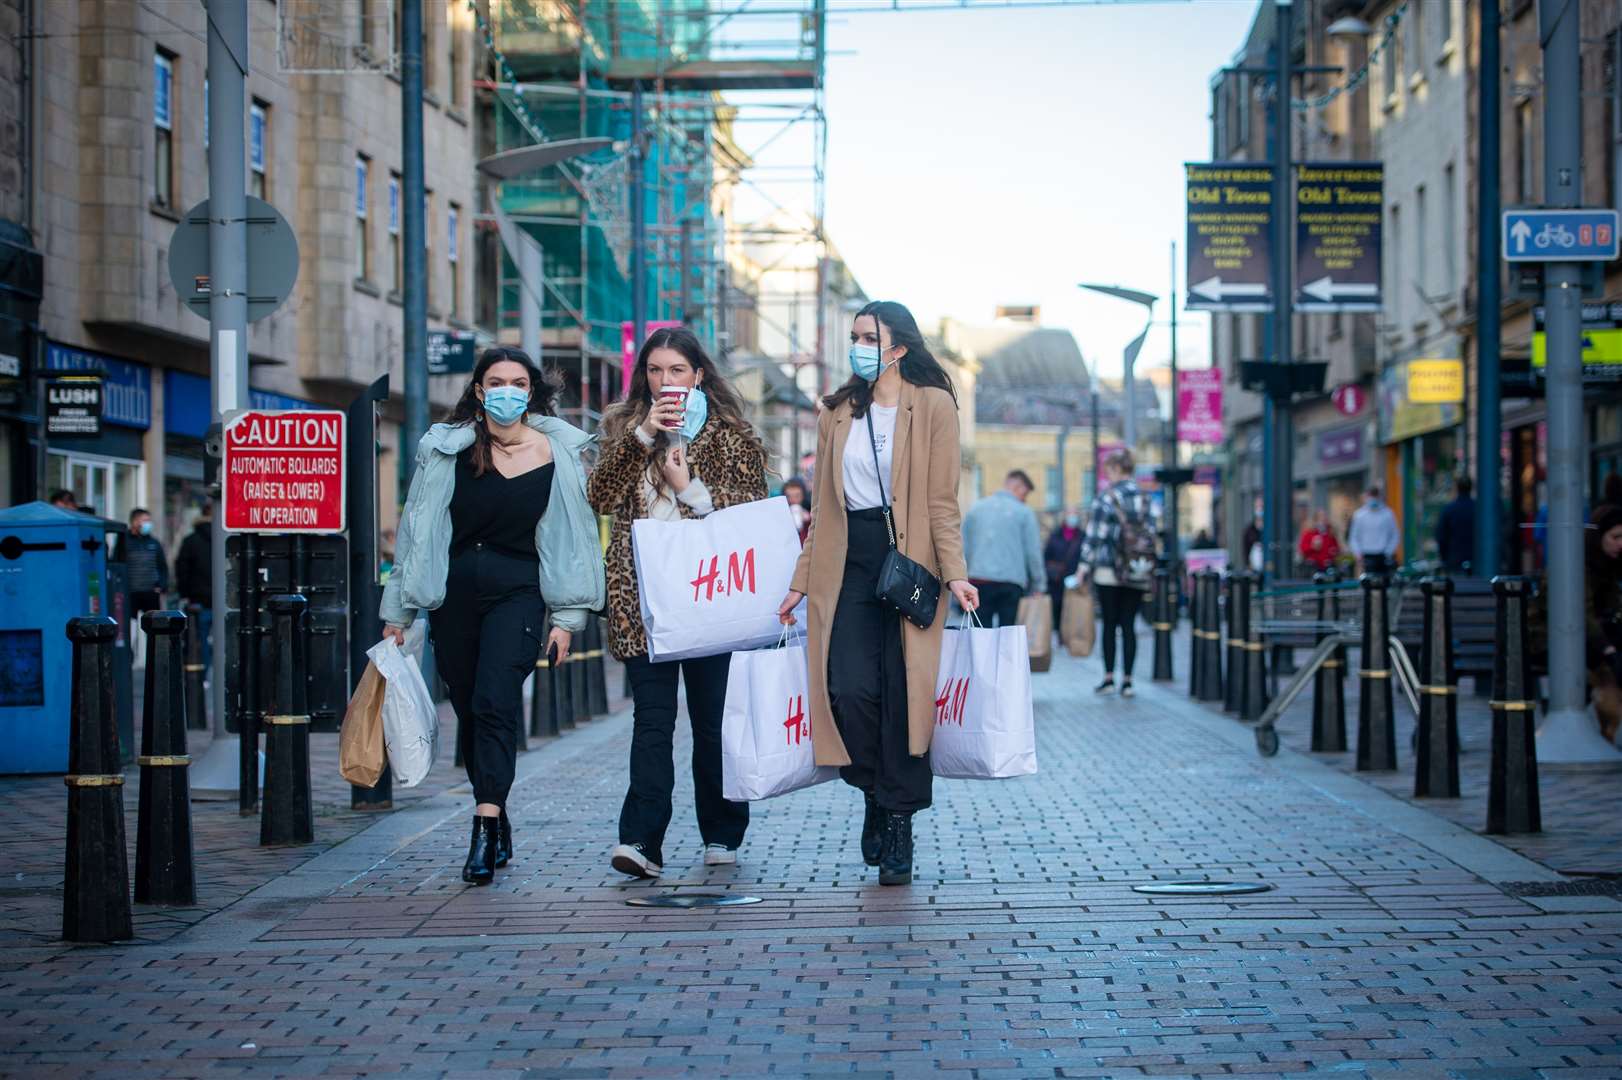 Shoppers in Inverness last weekend, ahead of new restrictions coming on Boxing Day.